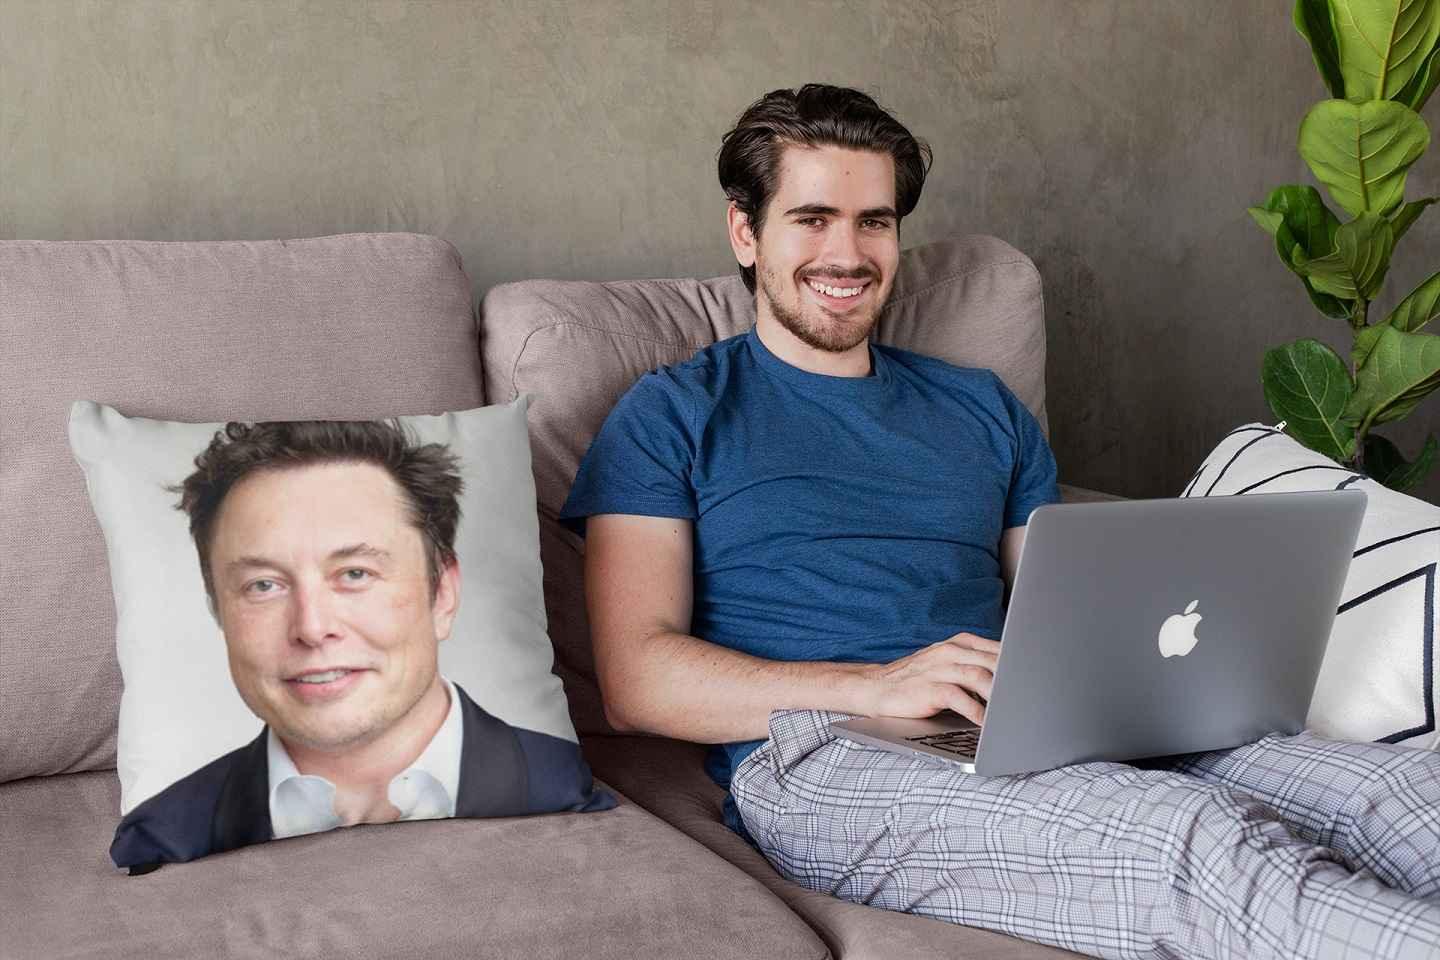 A smiling young man with a laptop sitting next to an Elon Musk pillow.